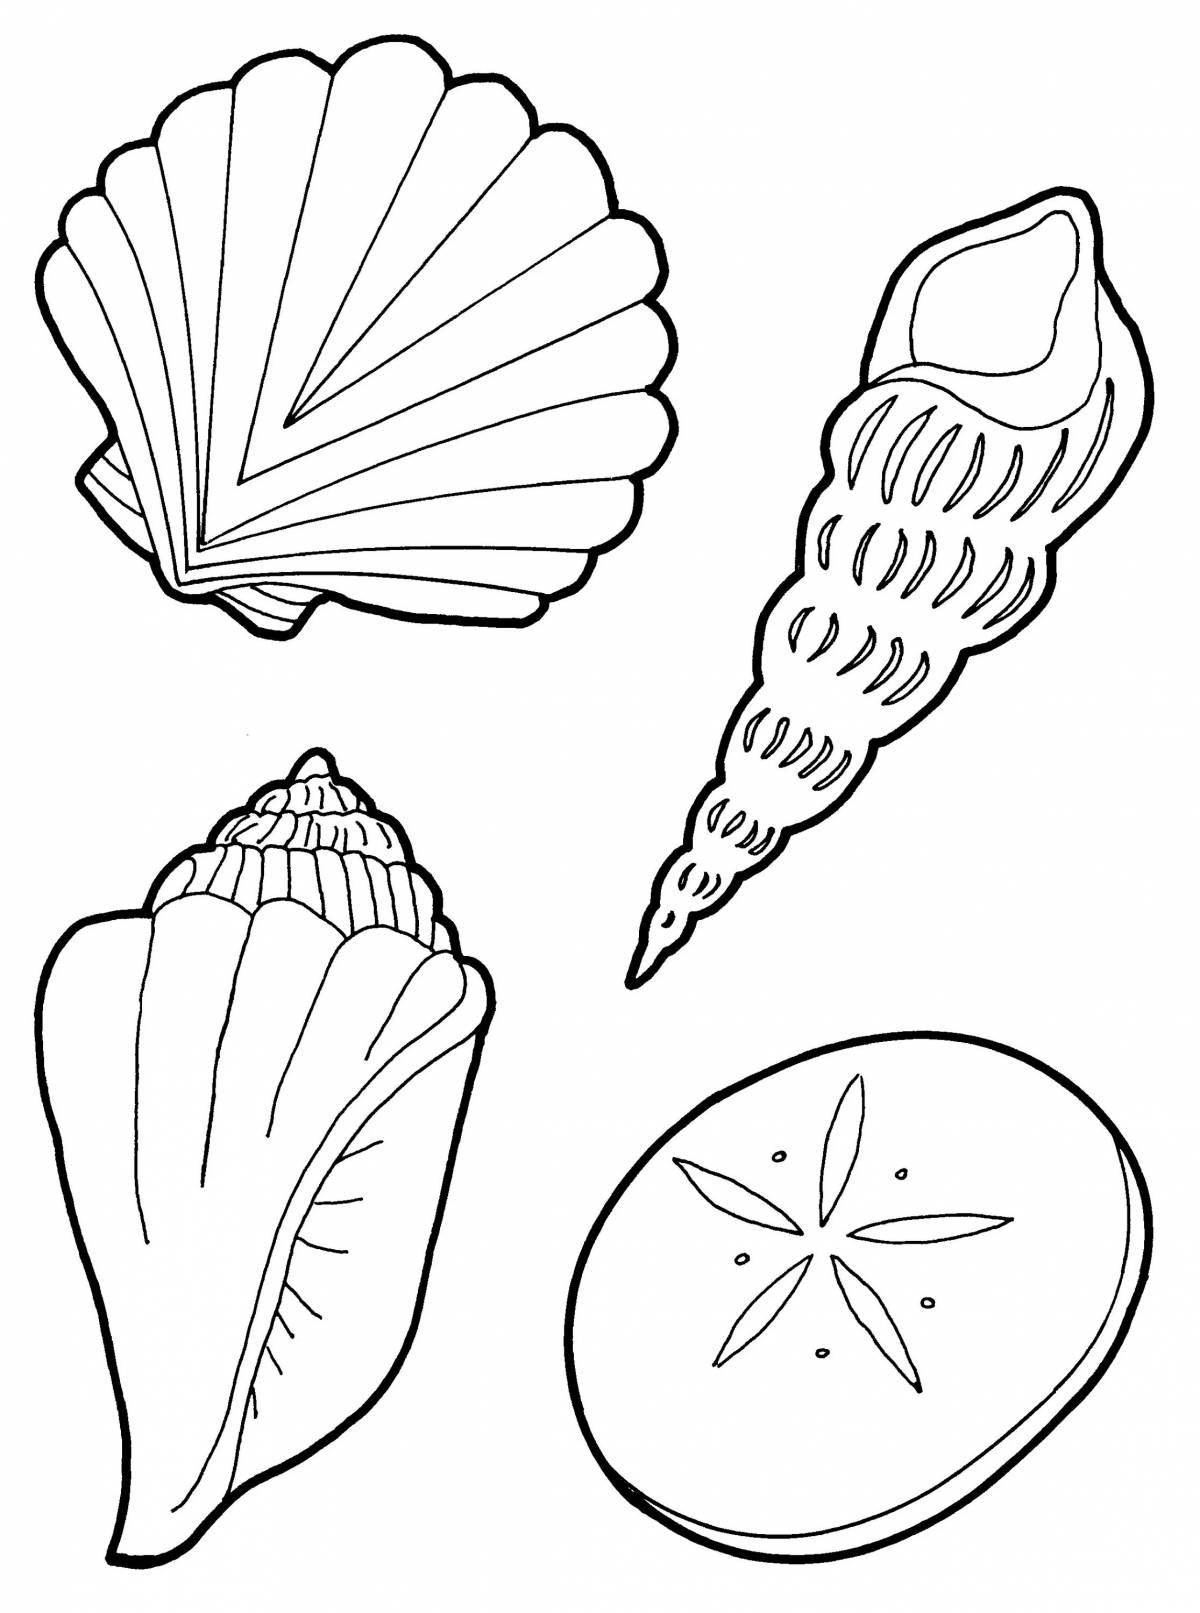 Exuberant shell coloring book for kids